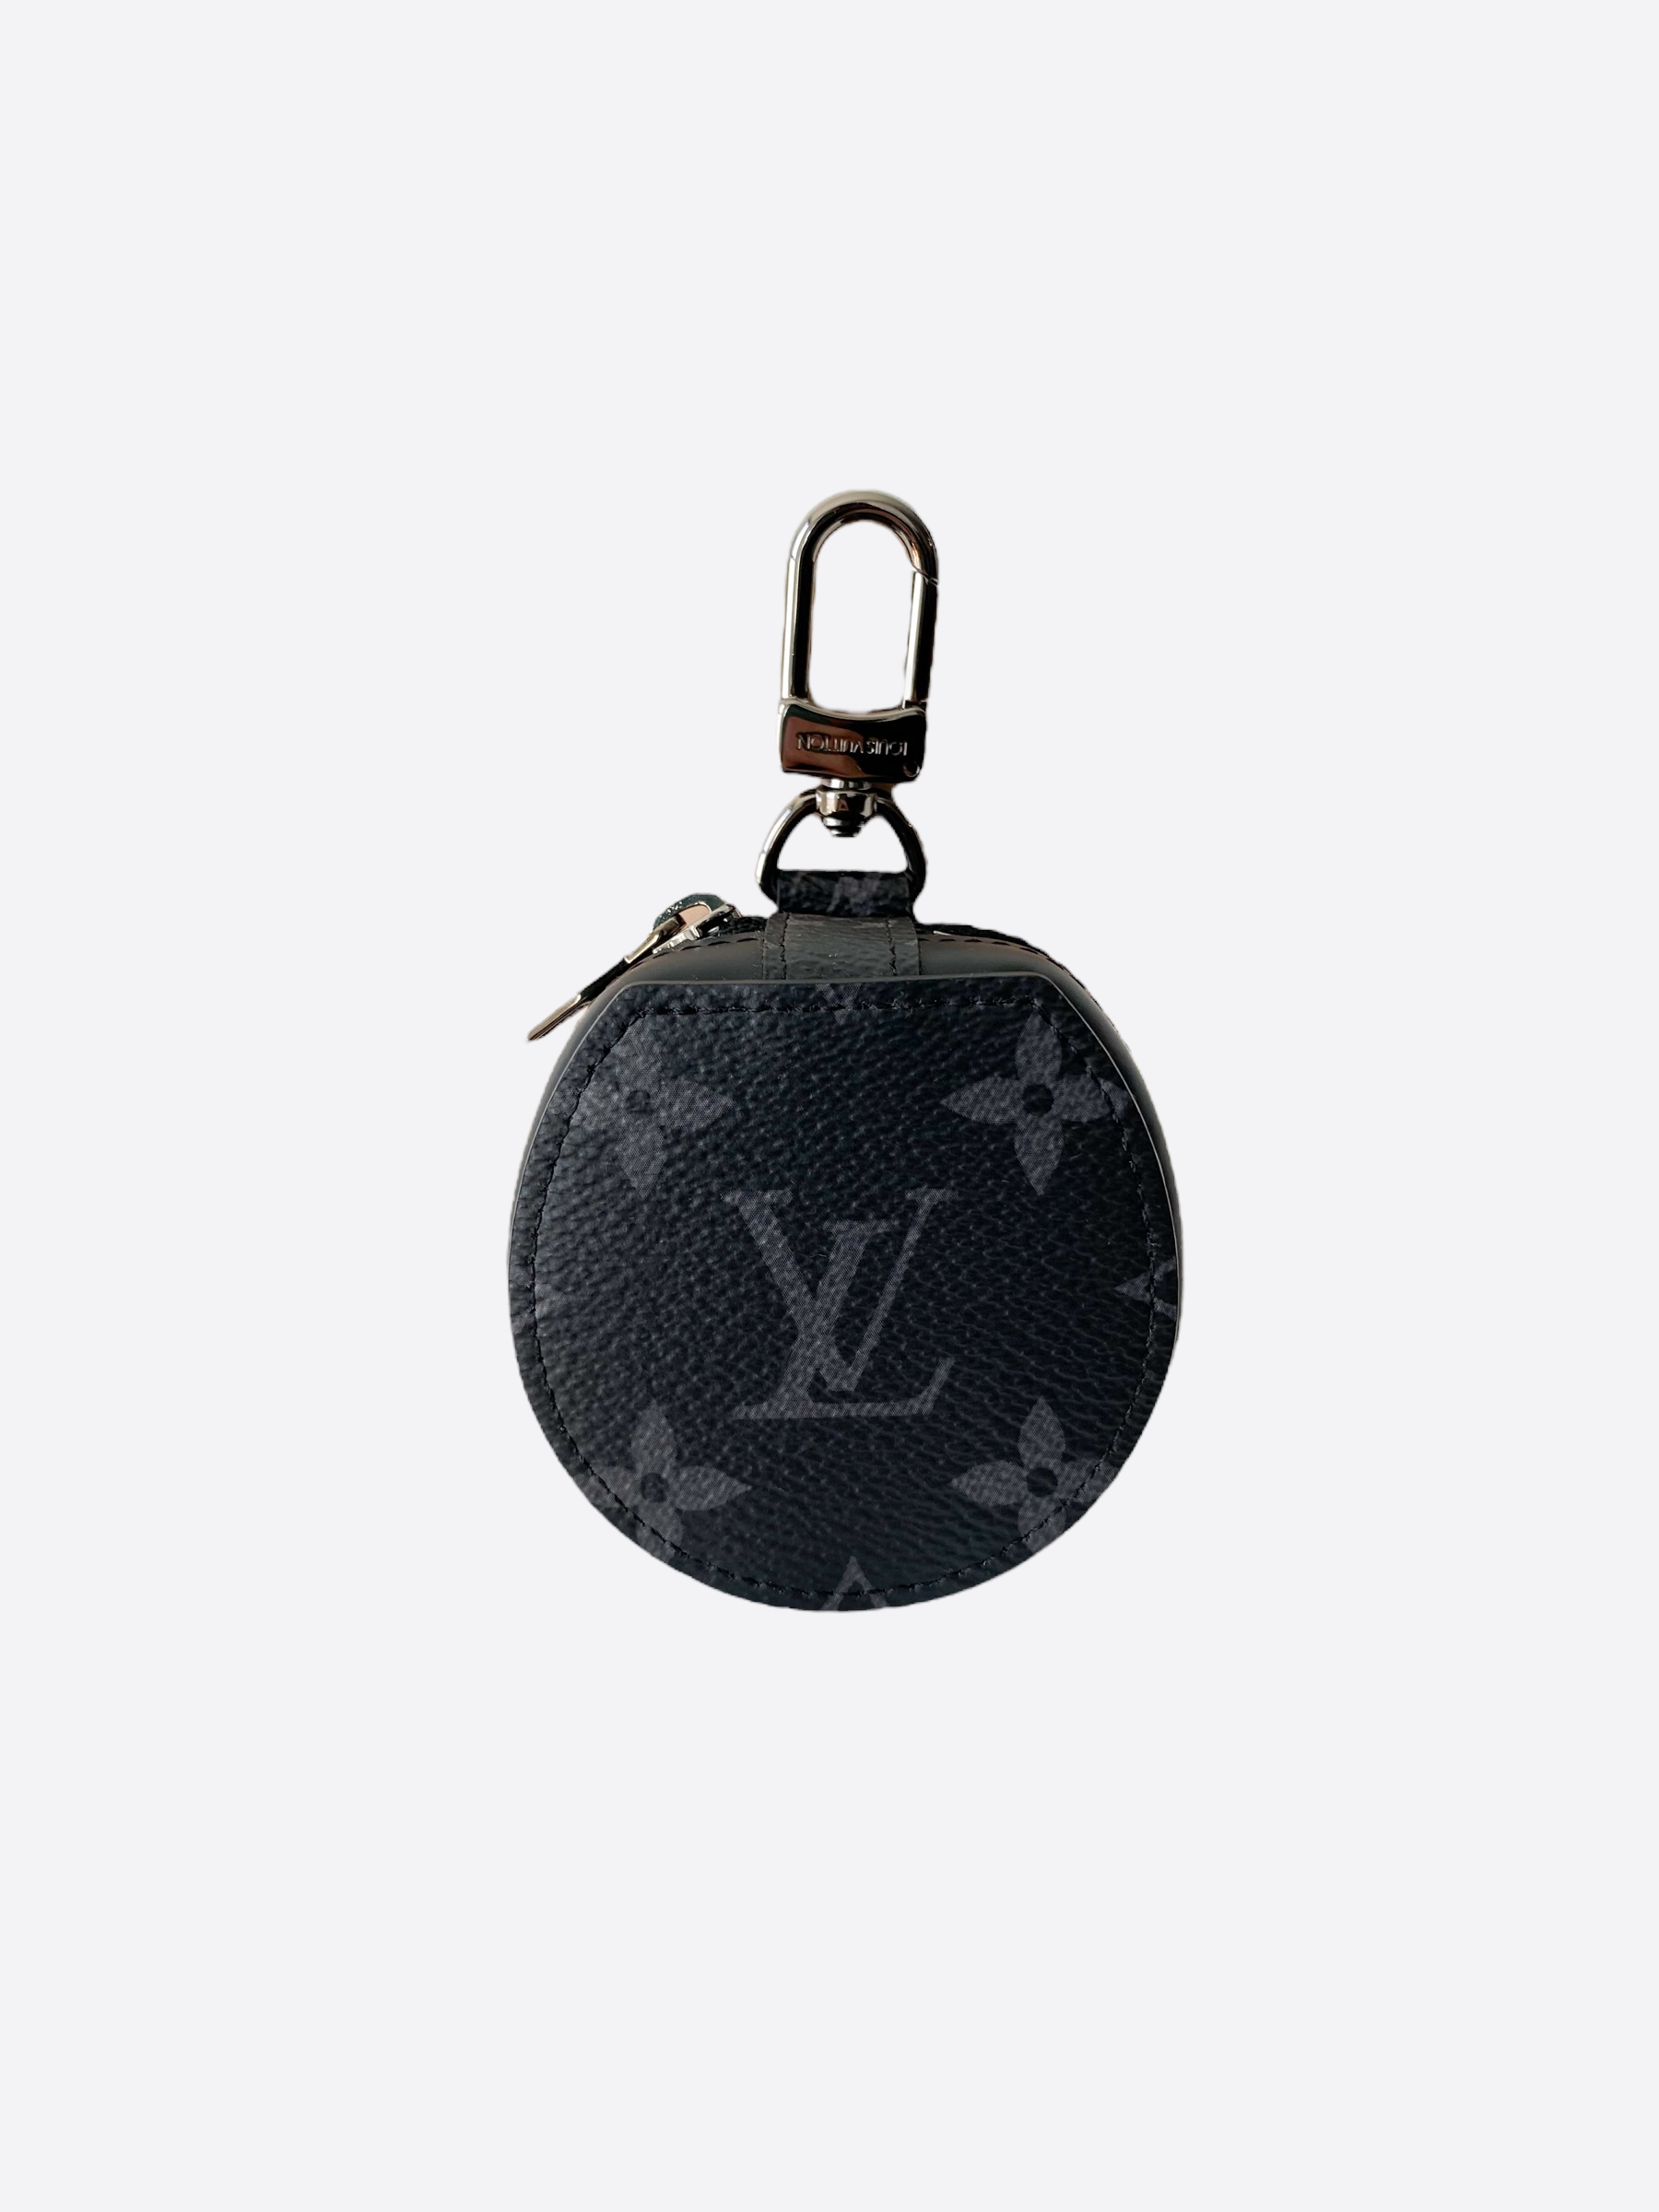 NEW LV Fashion Brand Earbuds AirPods PRO PRO 2 Monogram Case USA